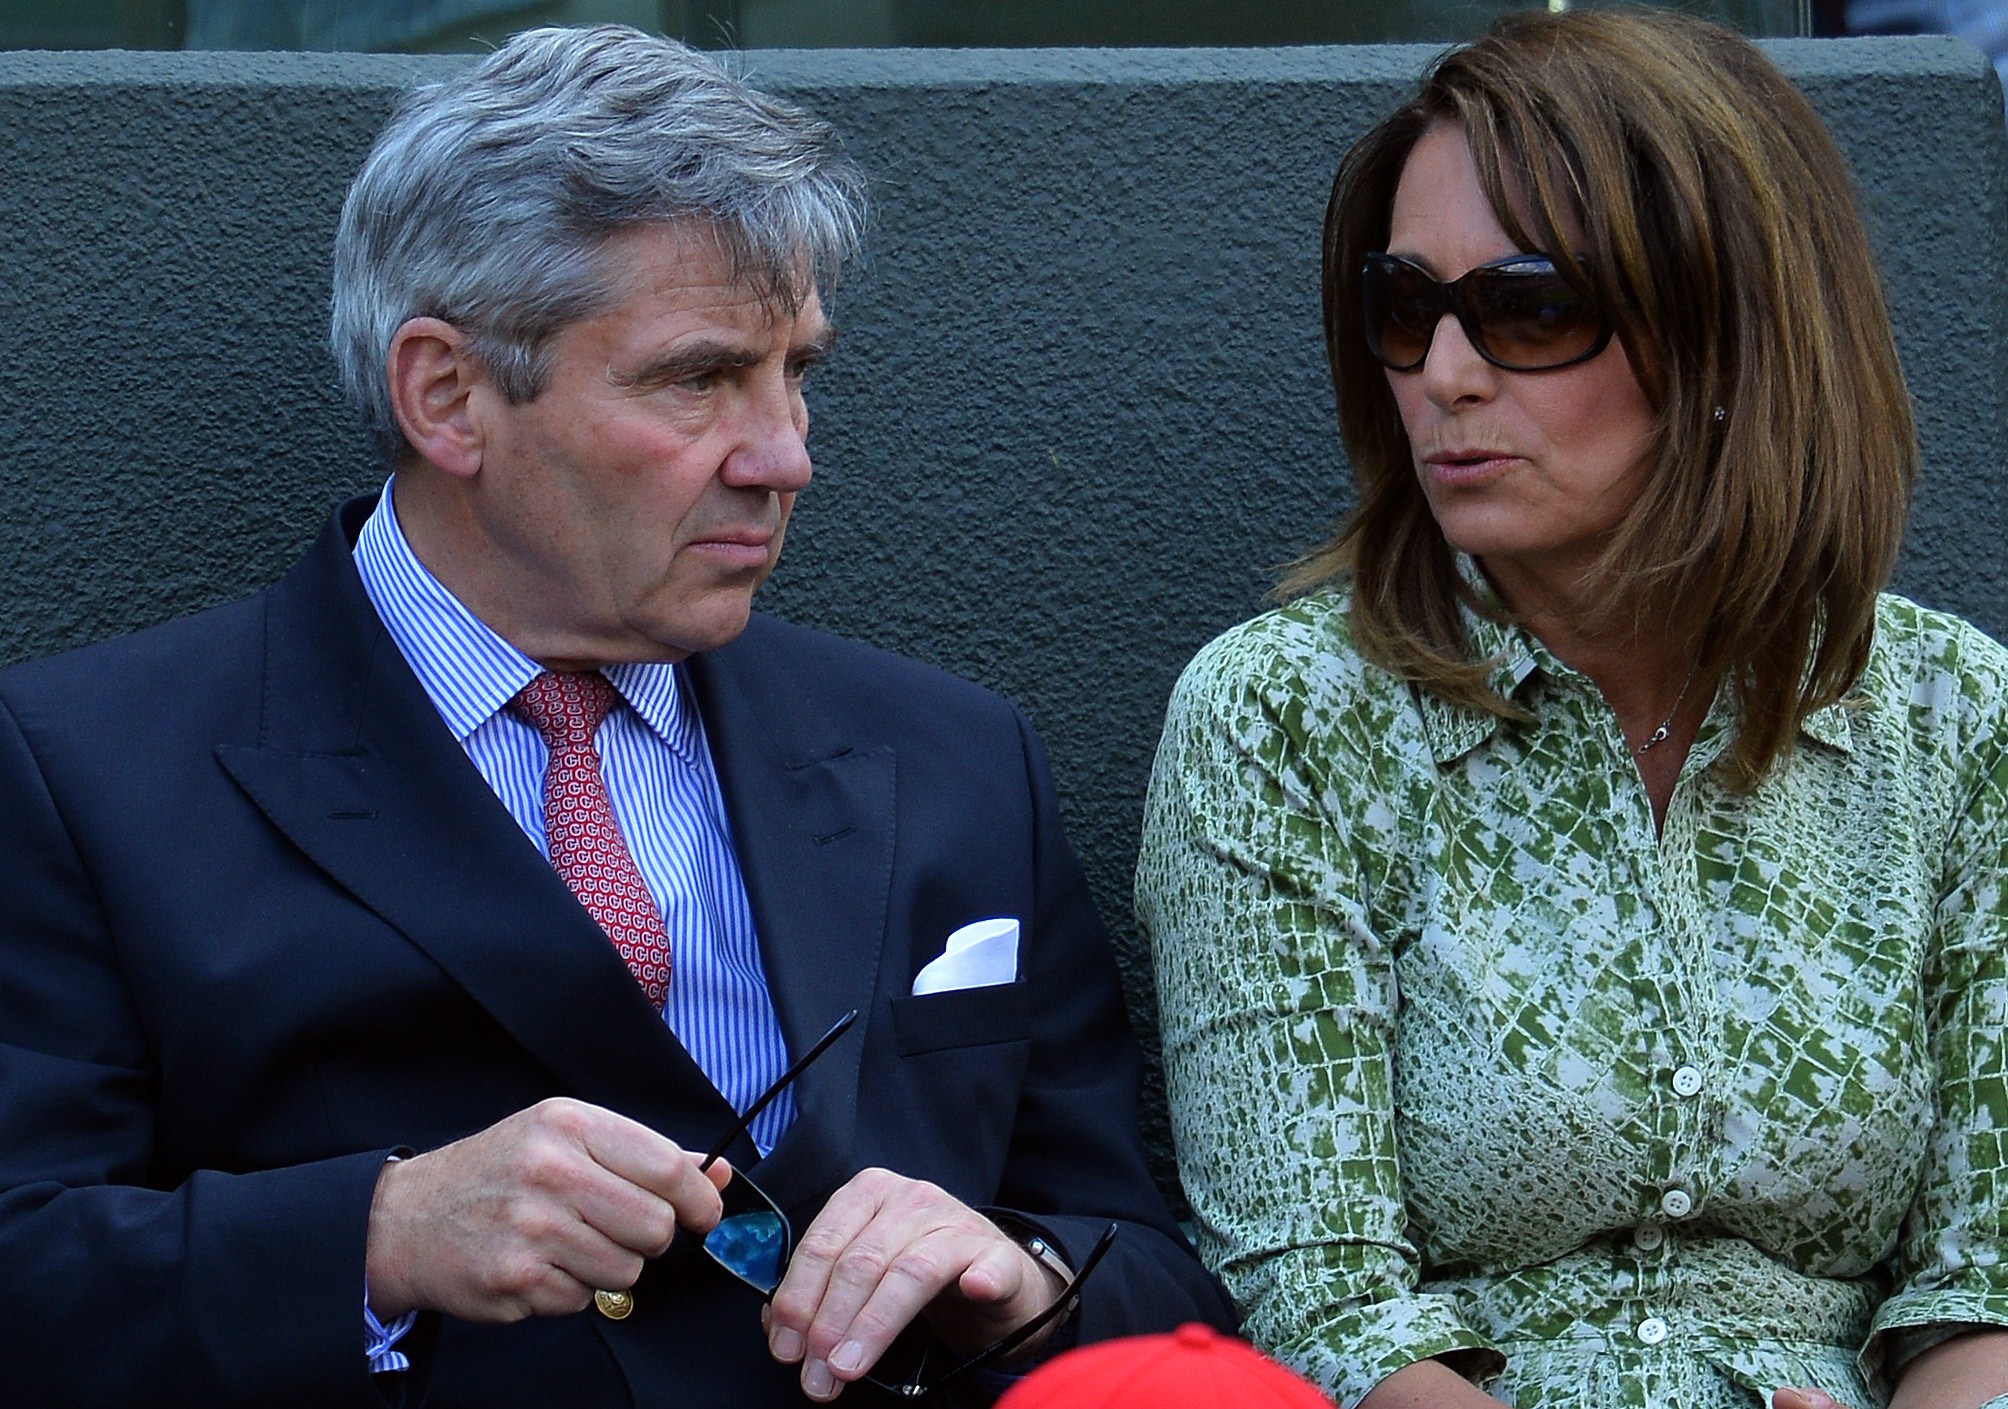 Michael Middleton and Carole Middleton at the Wimbledon Championships in London in 2015 | Source: Getty Images